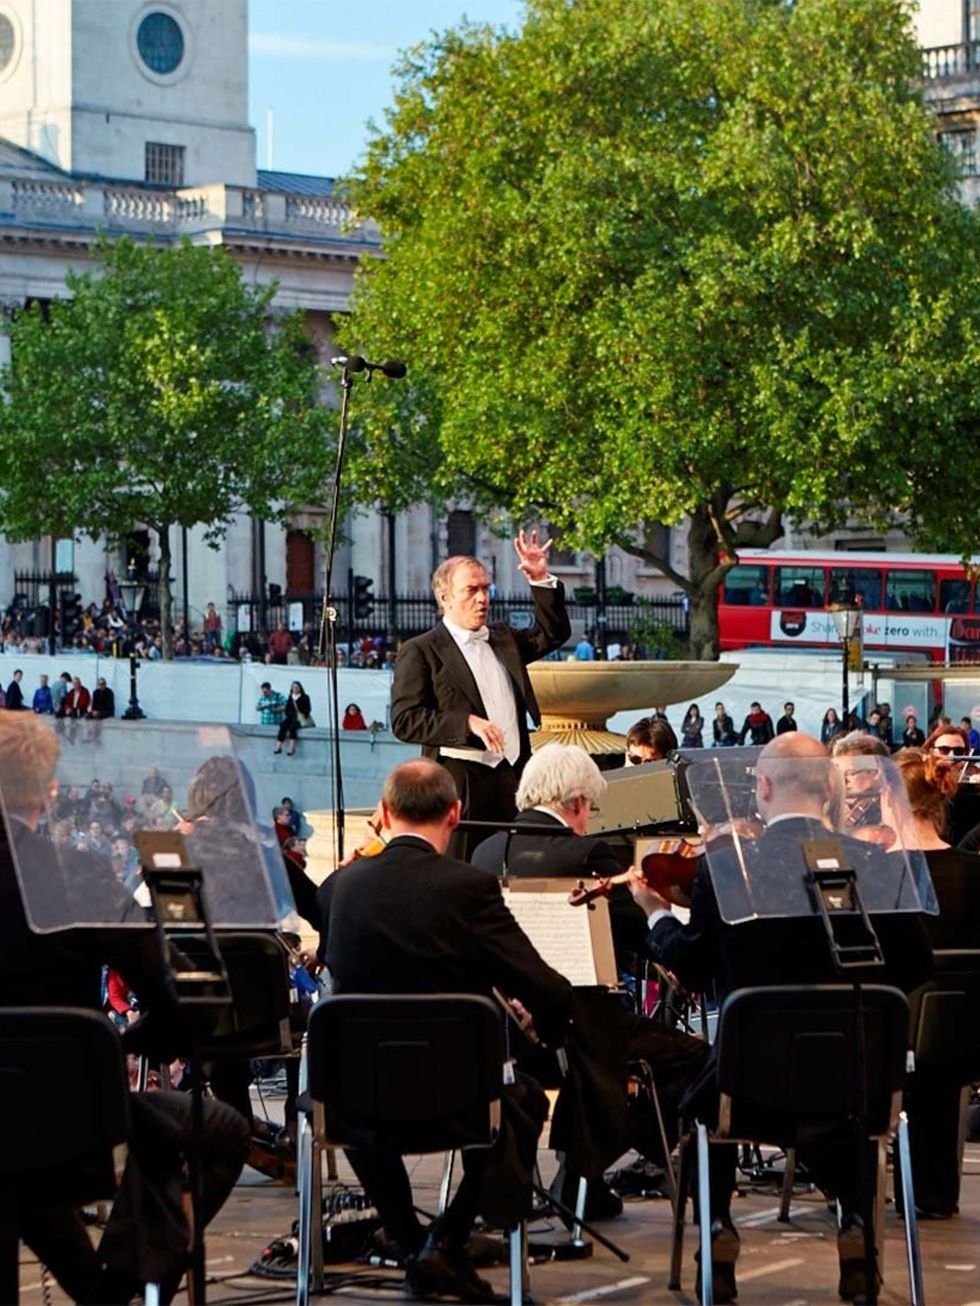 &lt;p&gt;&lt;strong&gt;MUSIC: London Symphony Orchestra in Trafalgar Square&lt;/strong&gt;&lt;/p&gt;&lt;p&gt;For anyone who fancies a foray into classical music but isn&rsquo;t quite ready for commitment, the BMW LSO Open Air Classics series - put on in T